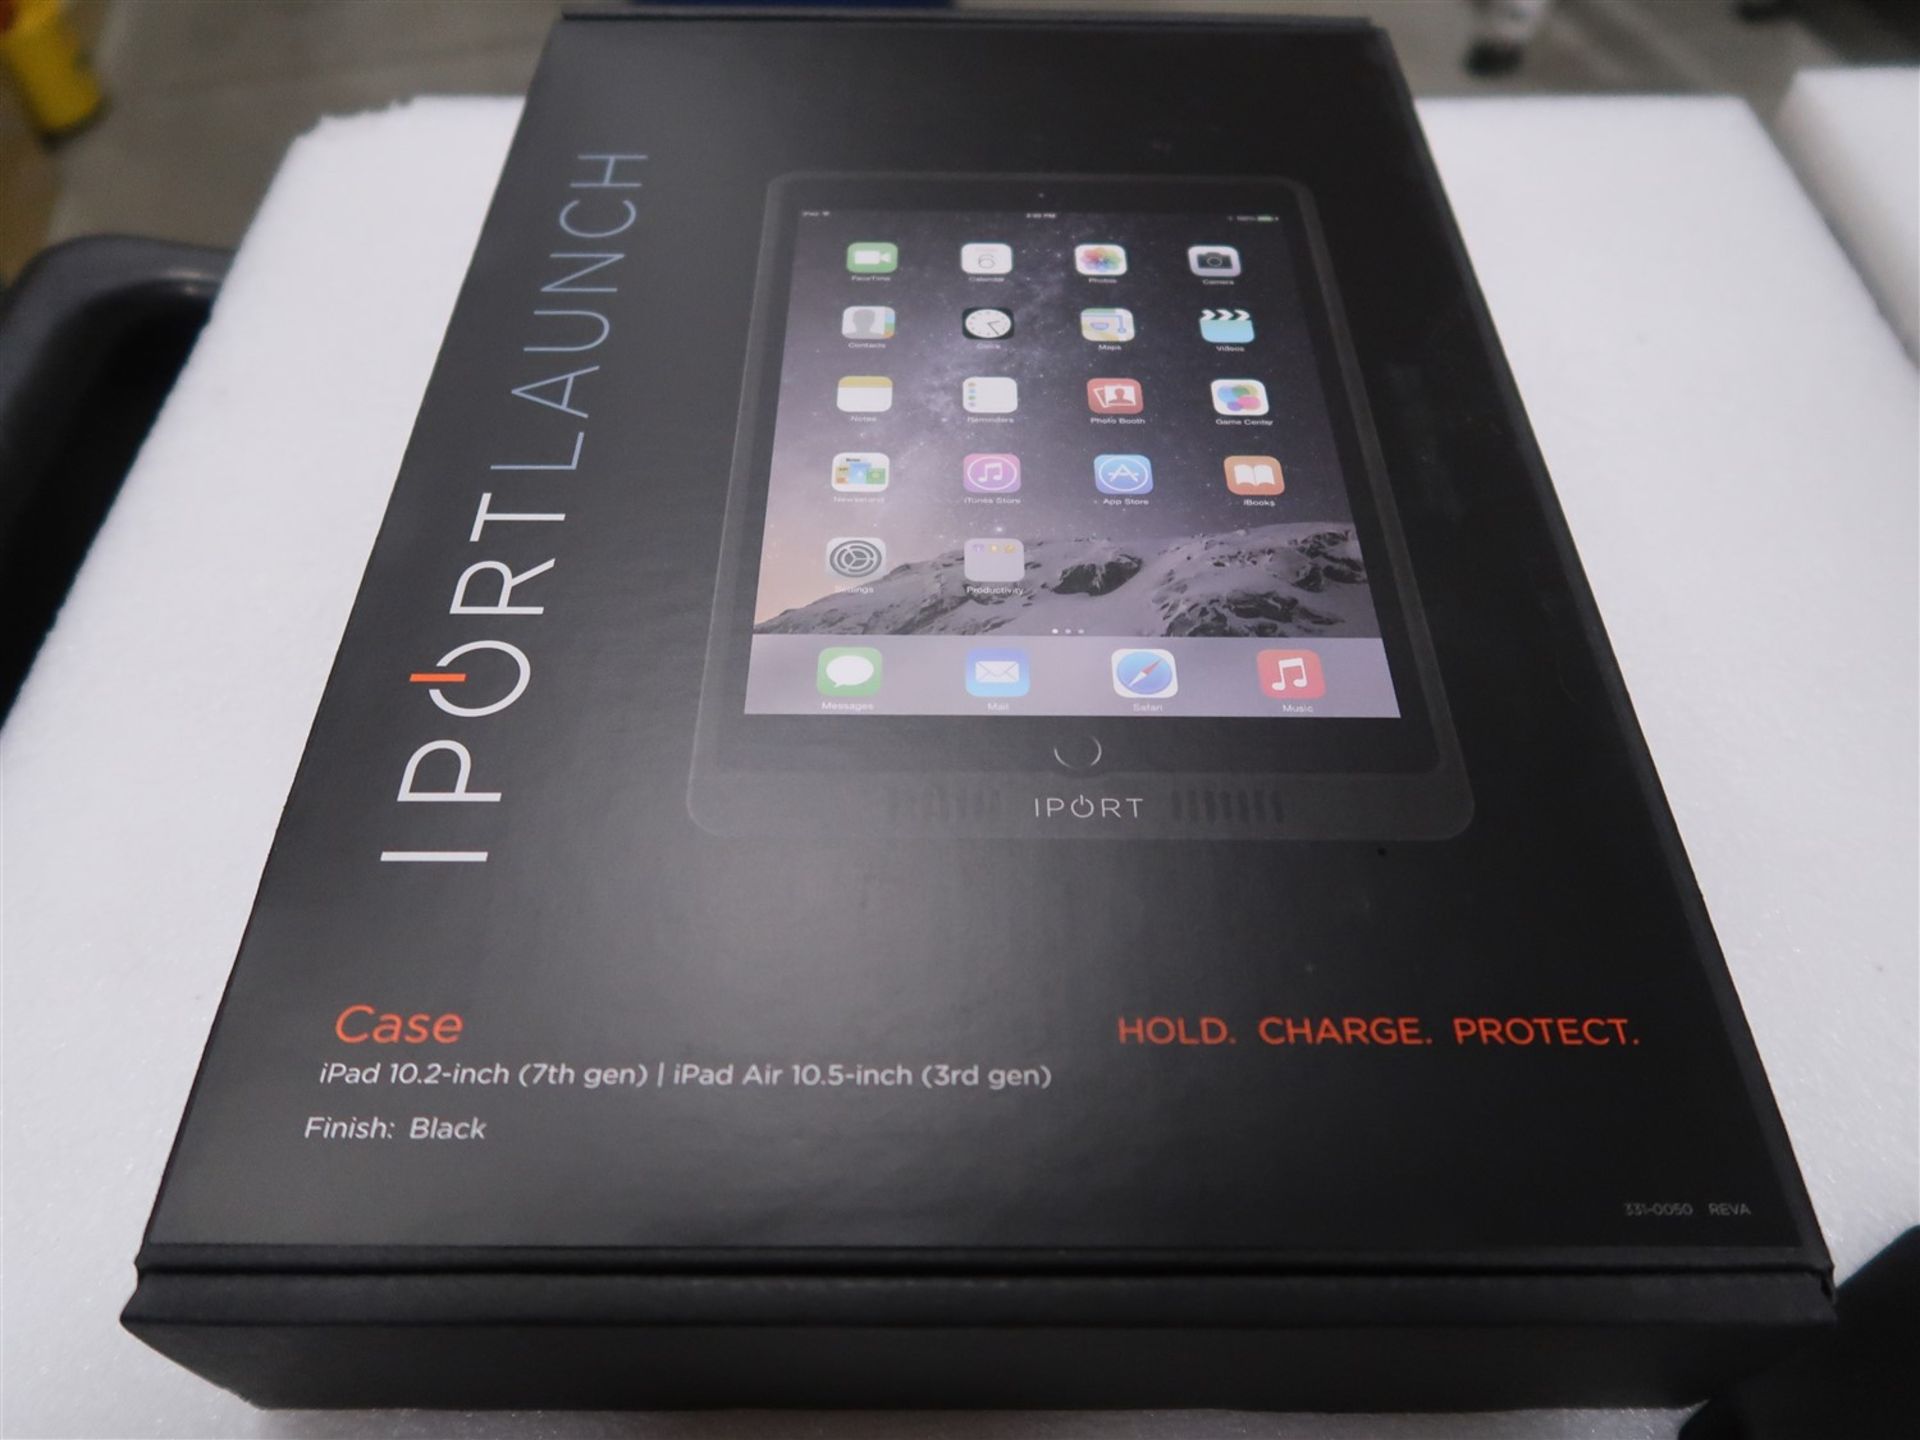 IPORT LAUNCH IPAD CASE 10.2 IN. BLACK - Image 2 of 3